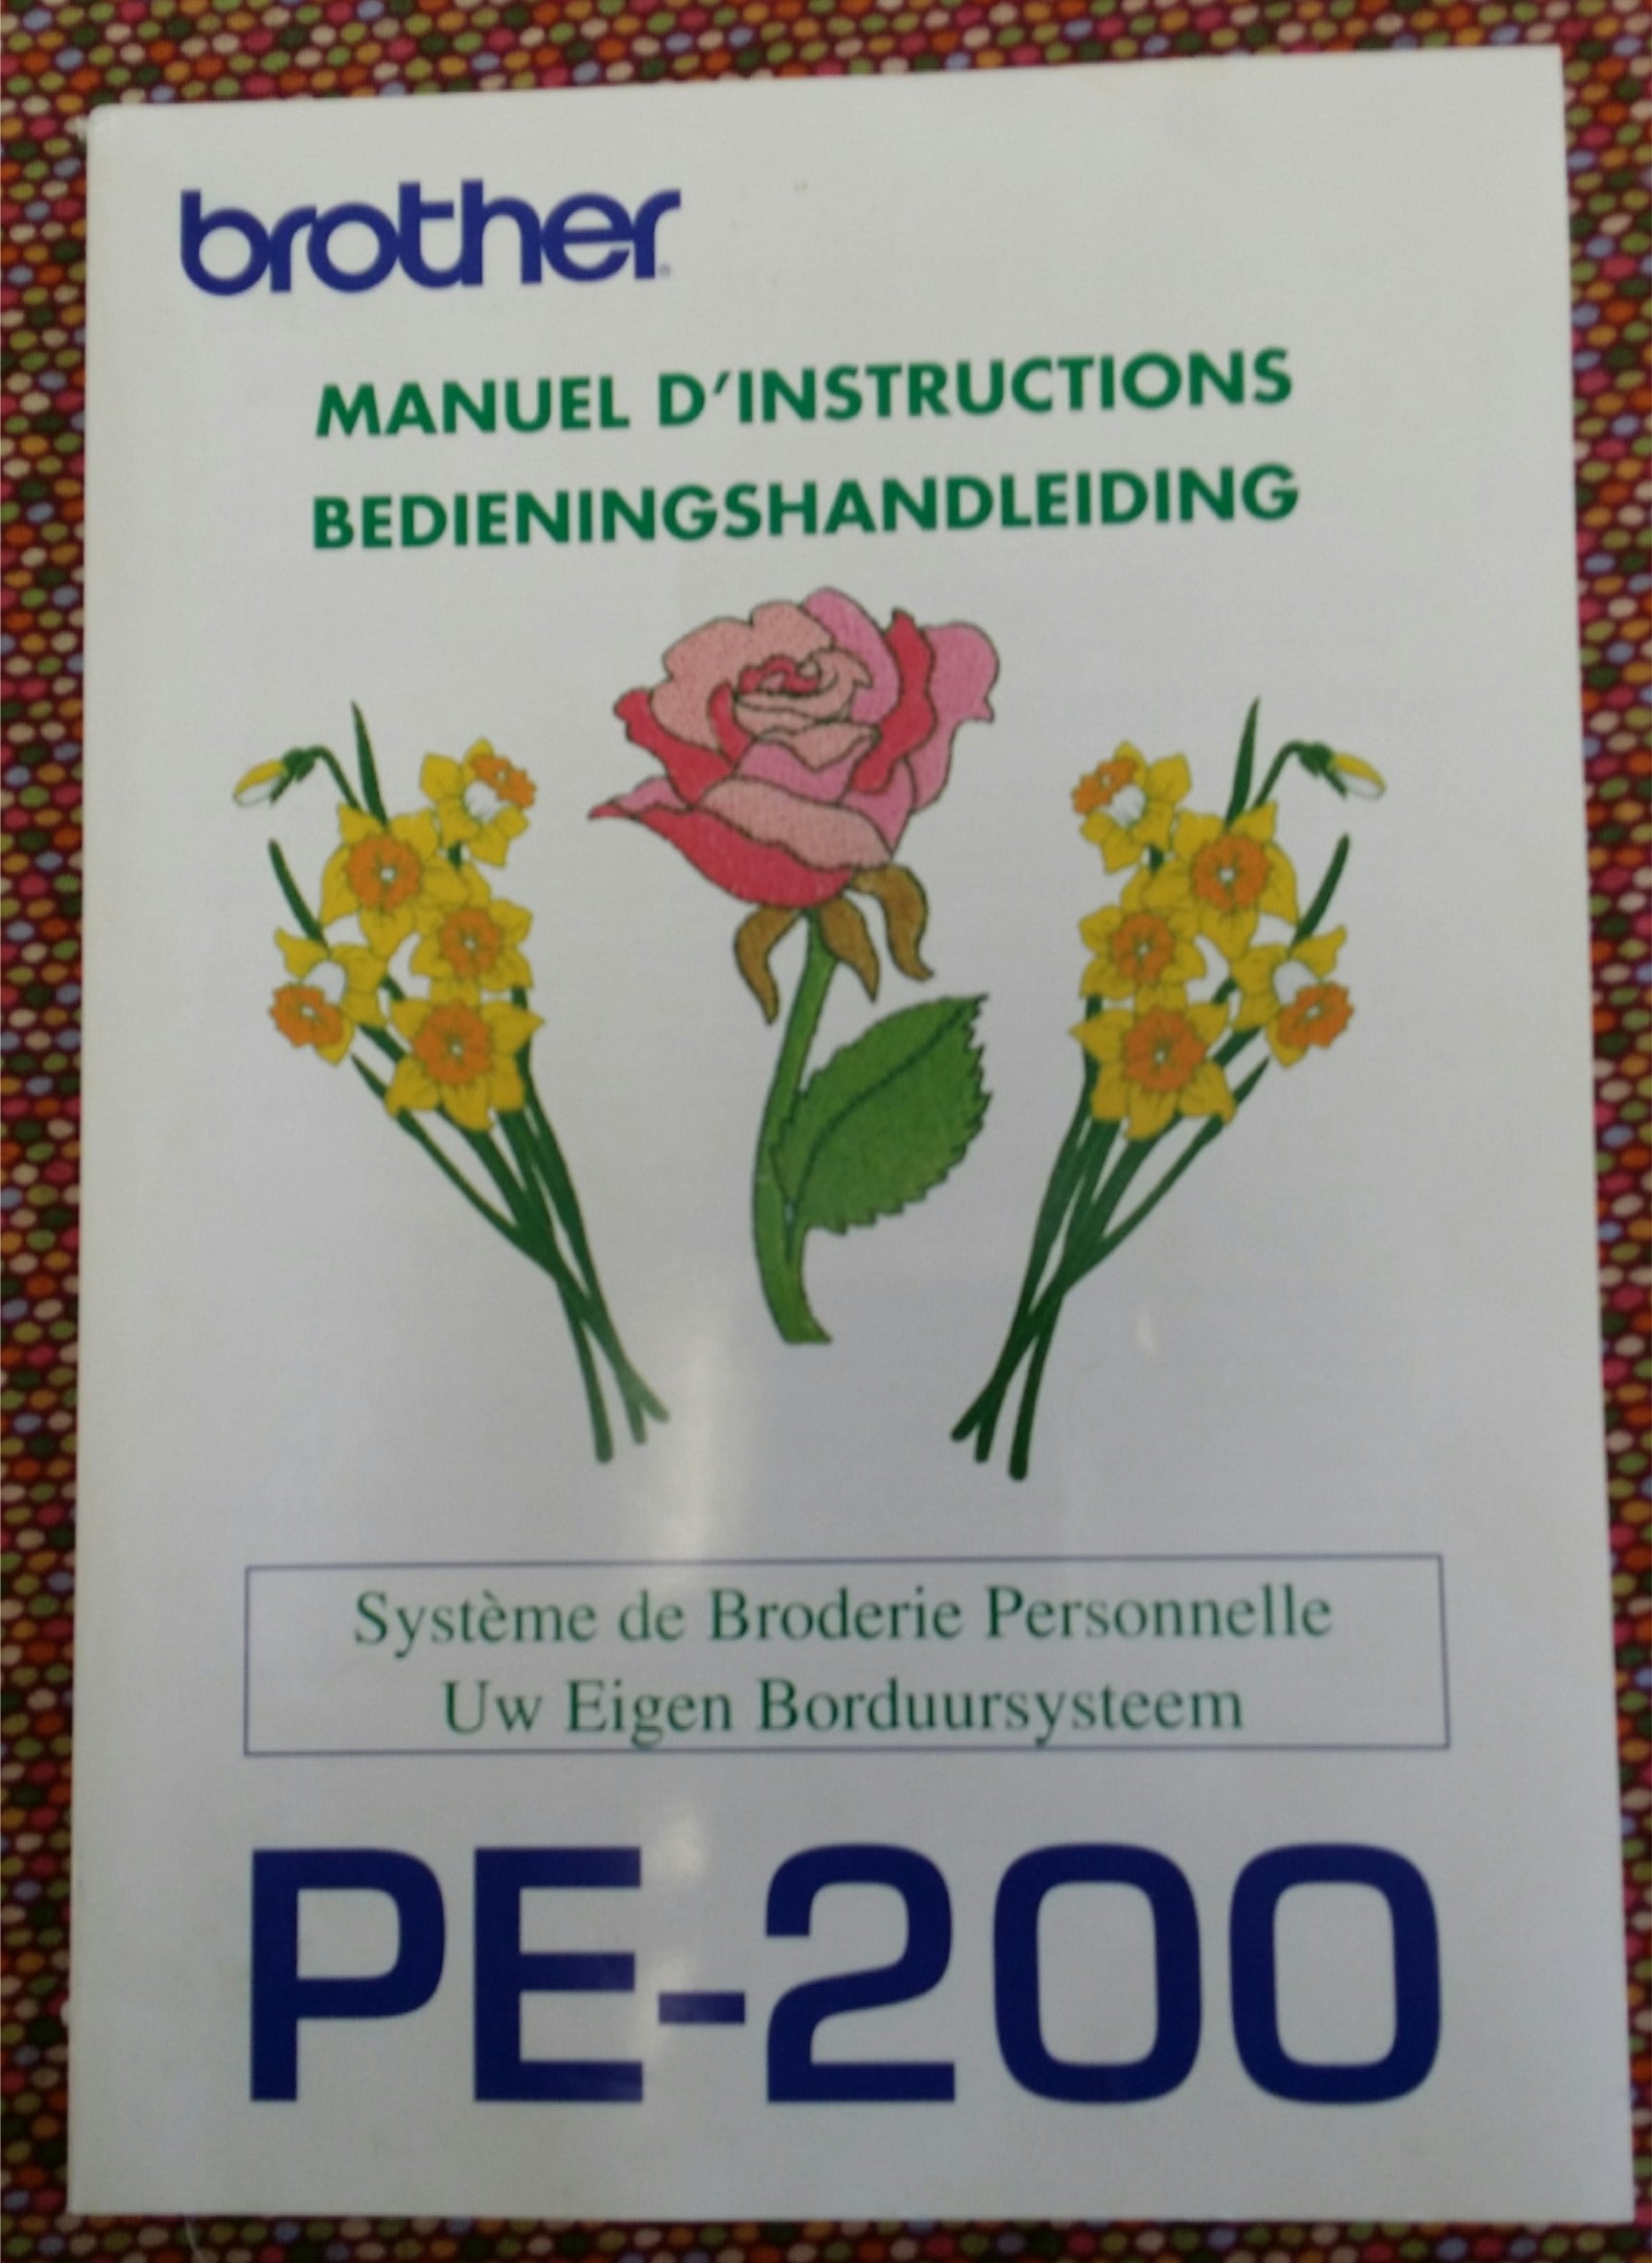 Brother PE-200 Instruciton Book - French/Dutch